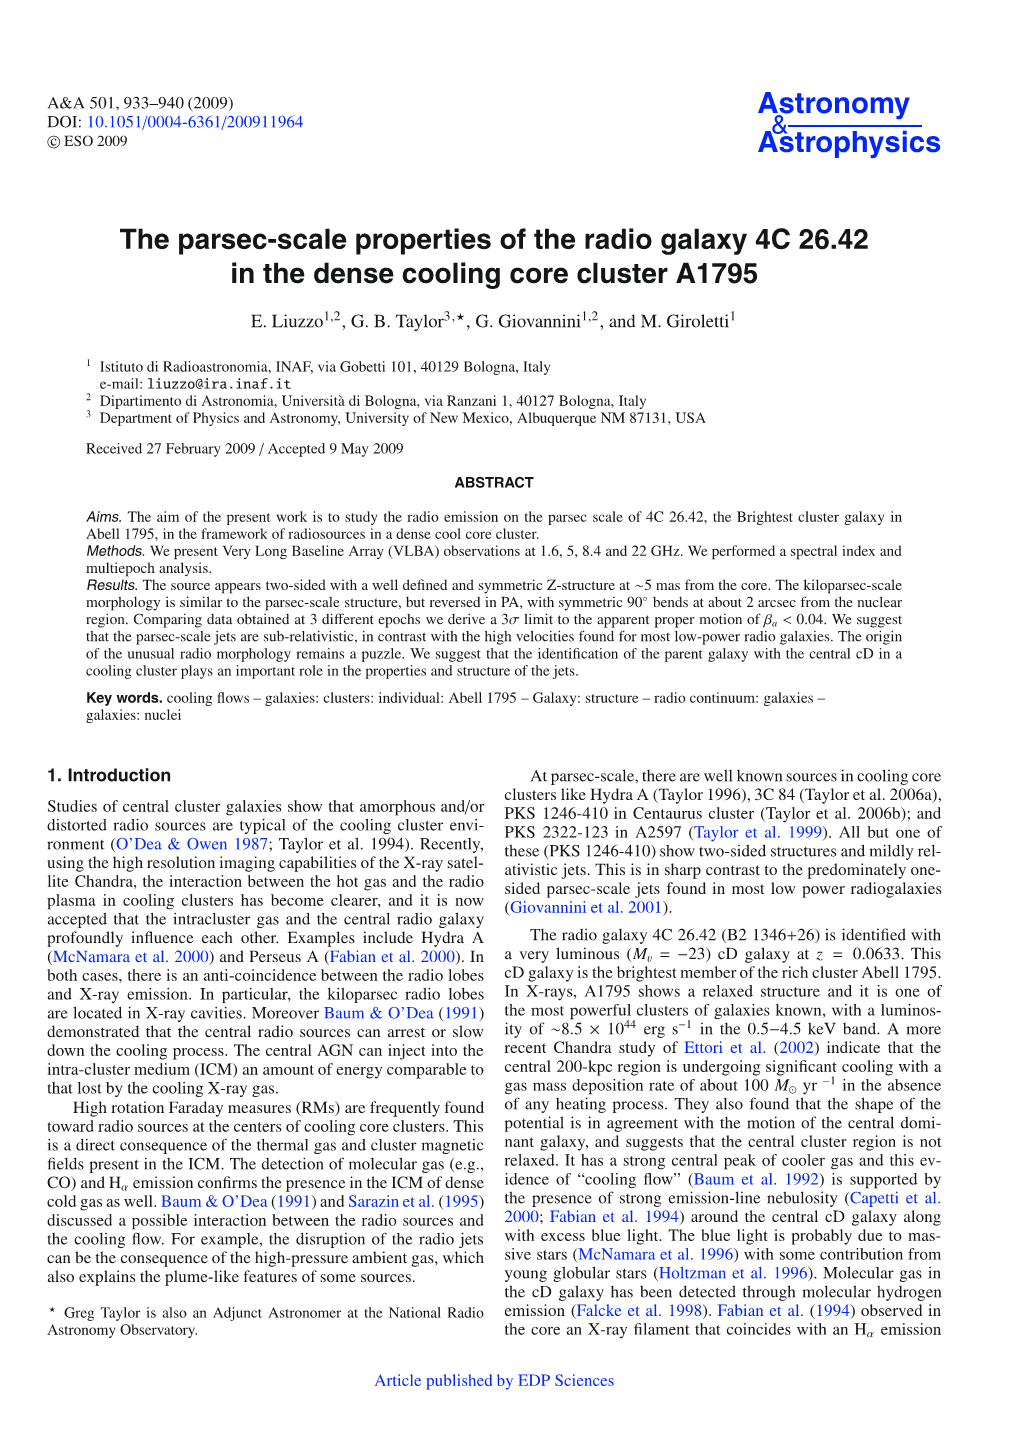 The Parsec-Scale Properties of the Radio Galaxy 4C 26.42 in the Dense Cooling Core Cluster A1795